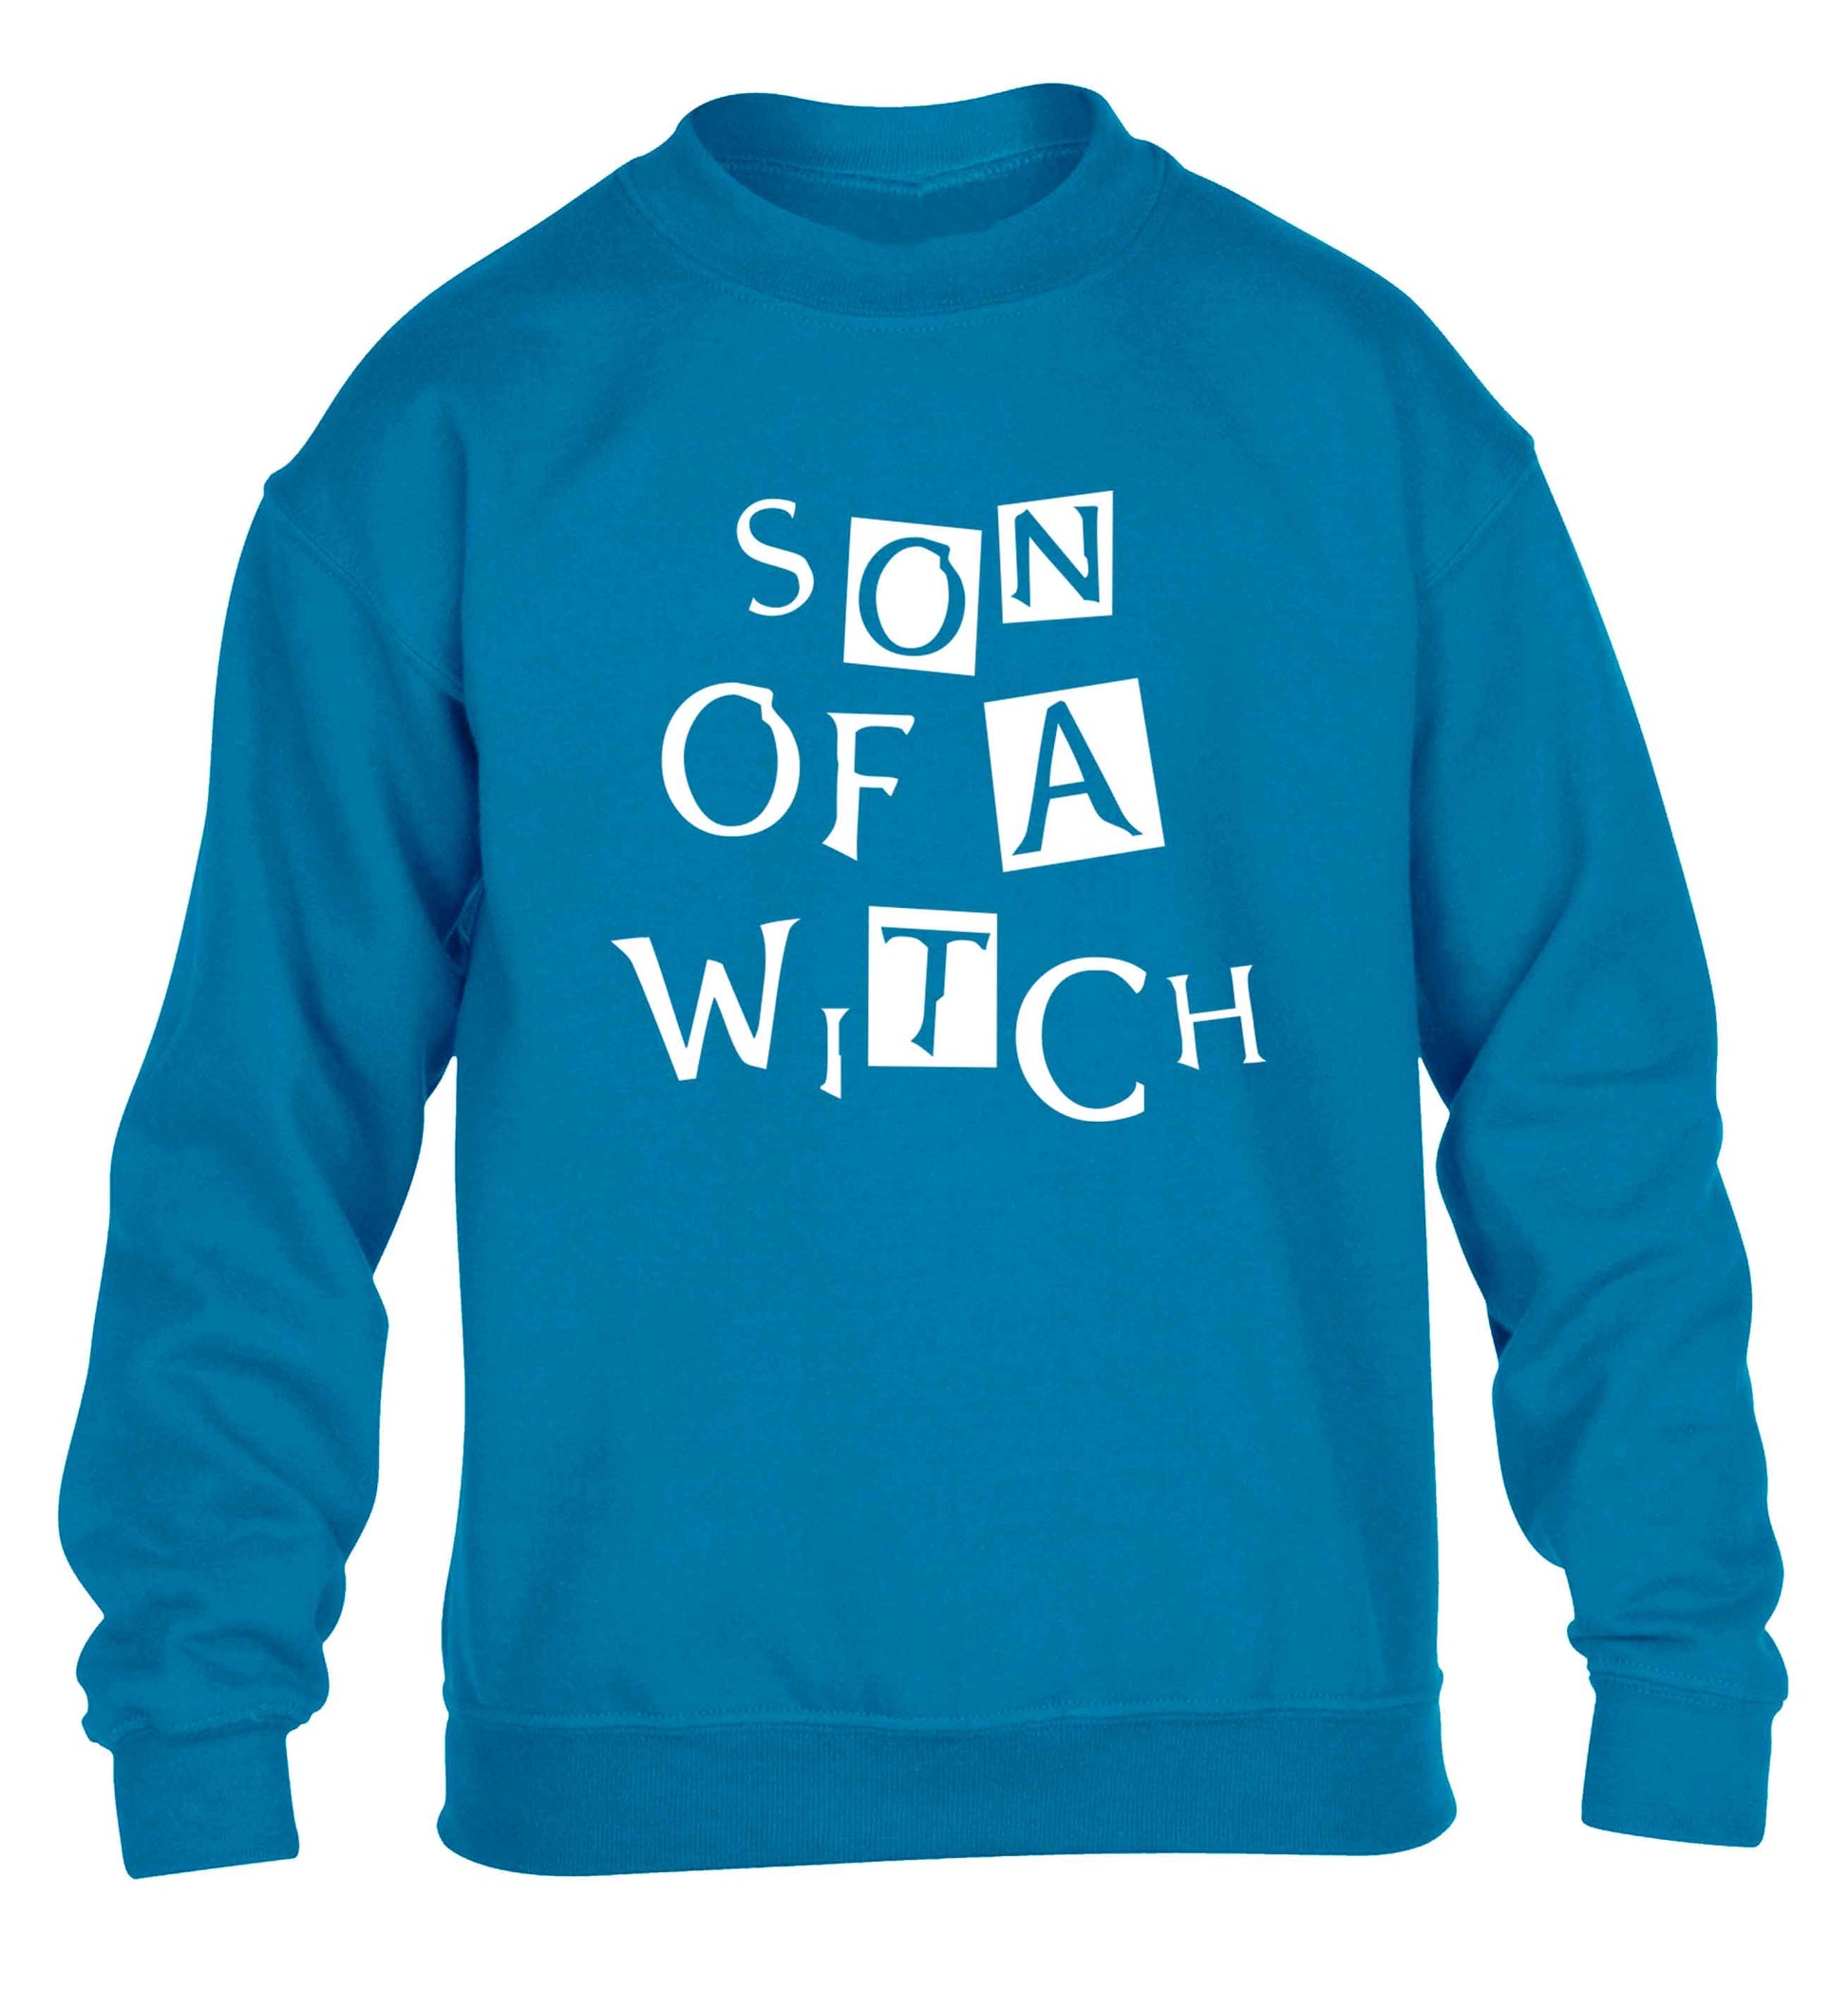 Son of a witch children's blue sweater 12-13 Years